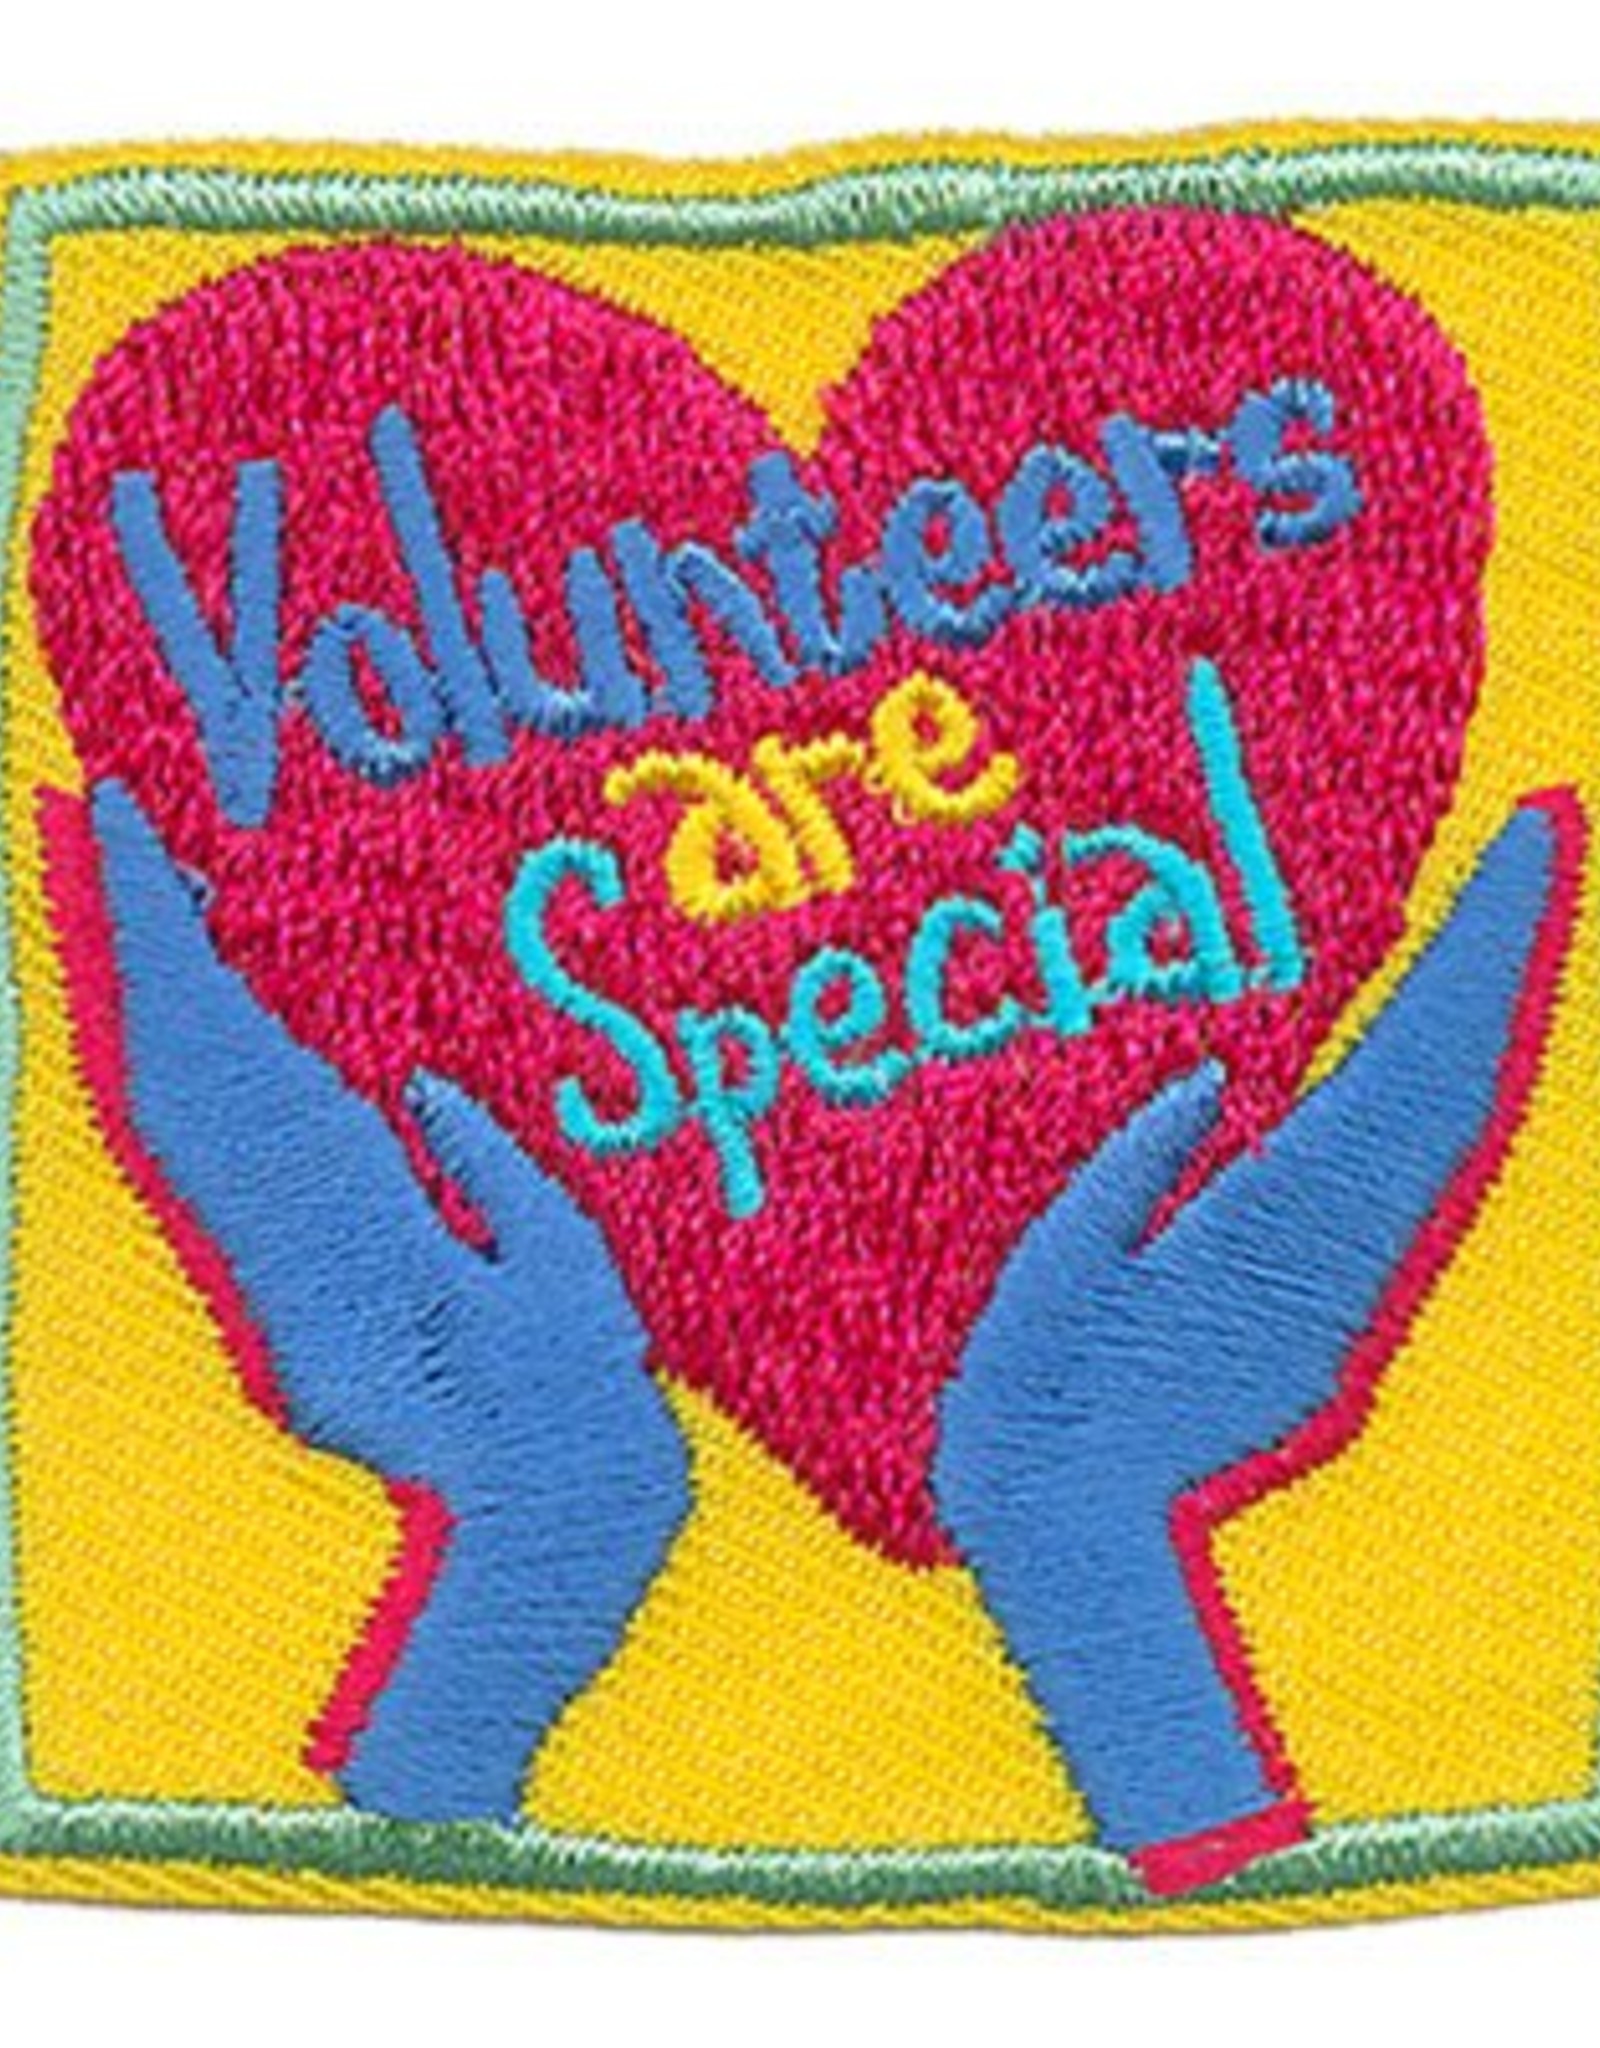 Advantage Emblem & Screen Prnt *Volunteers Are Special Heart Hands Fun Patch